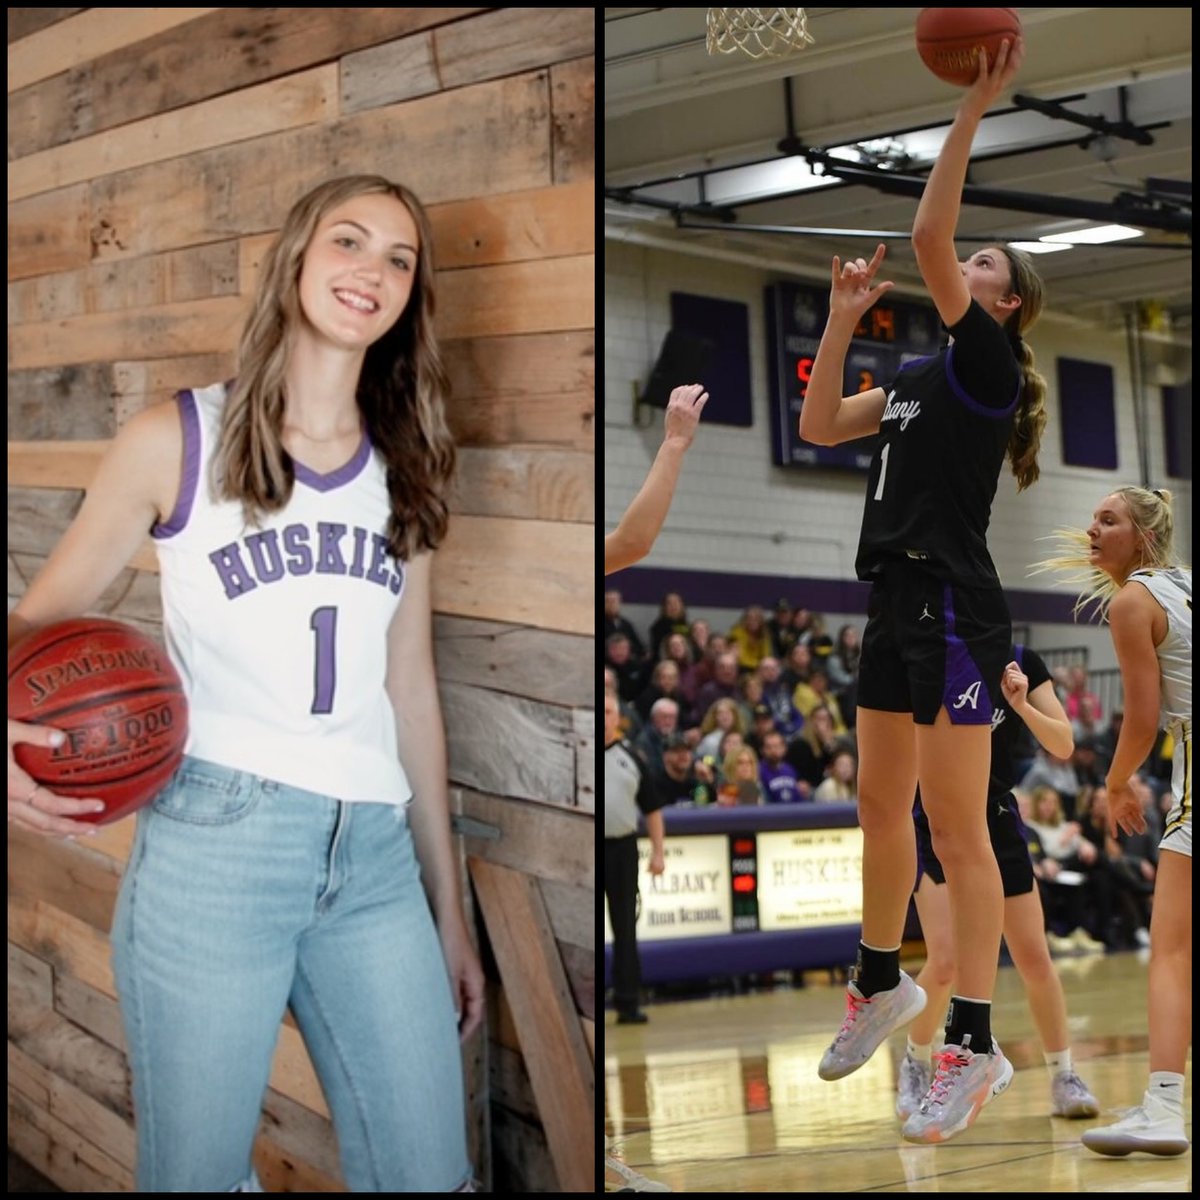 Out of Albany-Representing the Huskies- 6'3' Post #1- Alyssa Sand! Alyssa is headed to the Summit League next season to play for the University of St. Thomas Tommies! Congrats @alyssa_sand24 on being named a 2A All-Star! @AHSHuskies @GirlsHuskies @TommieWBBall